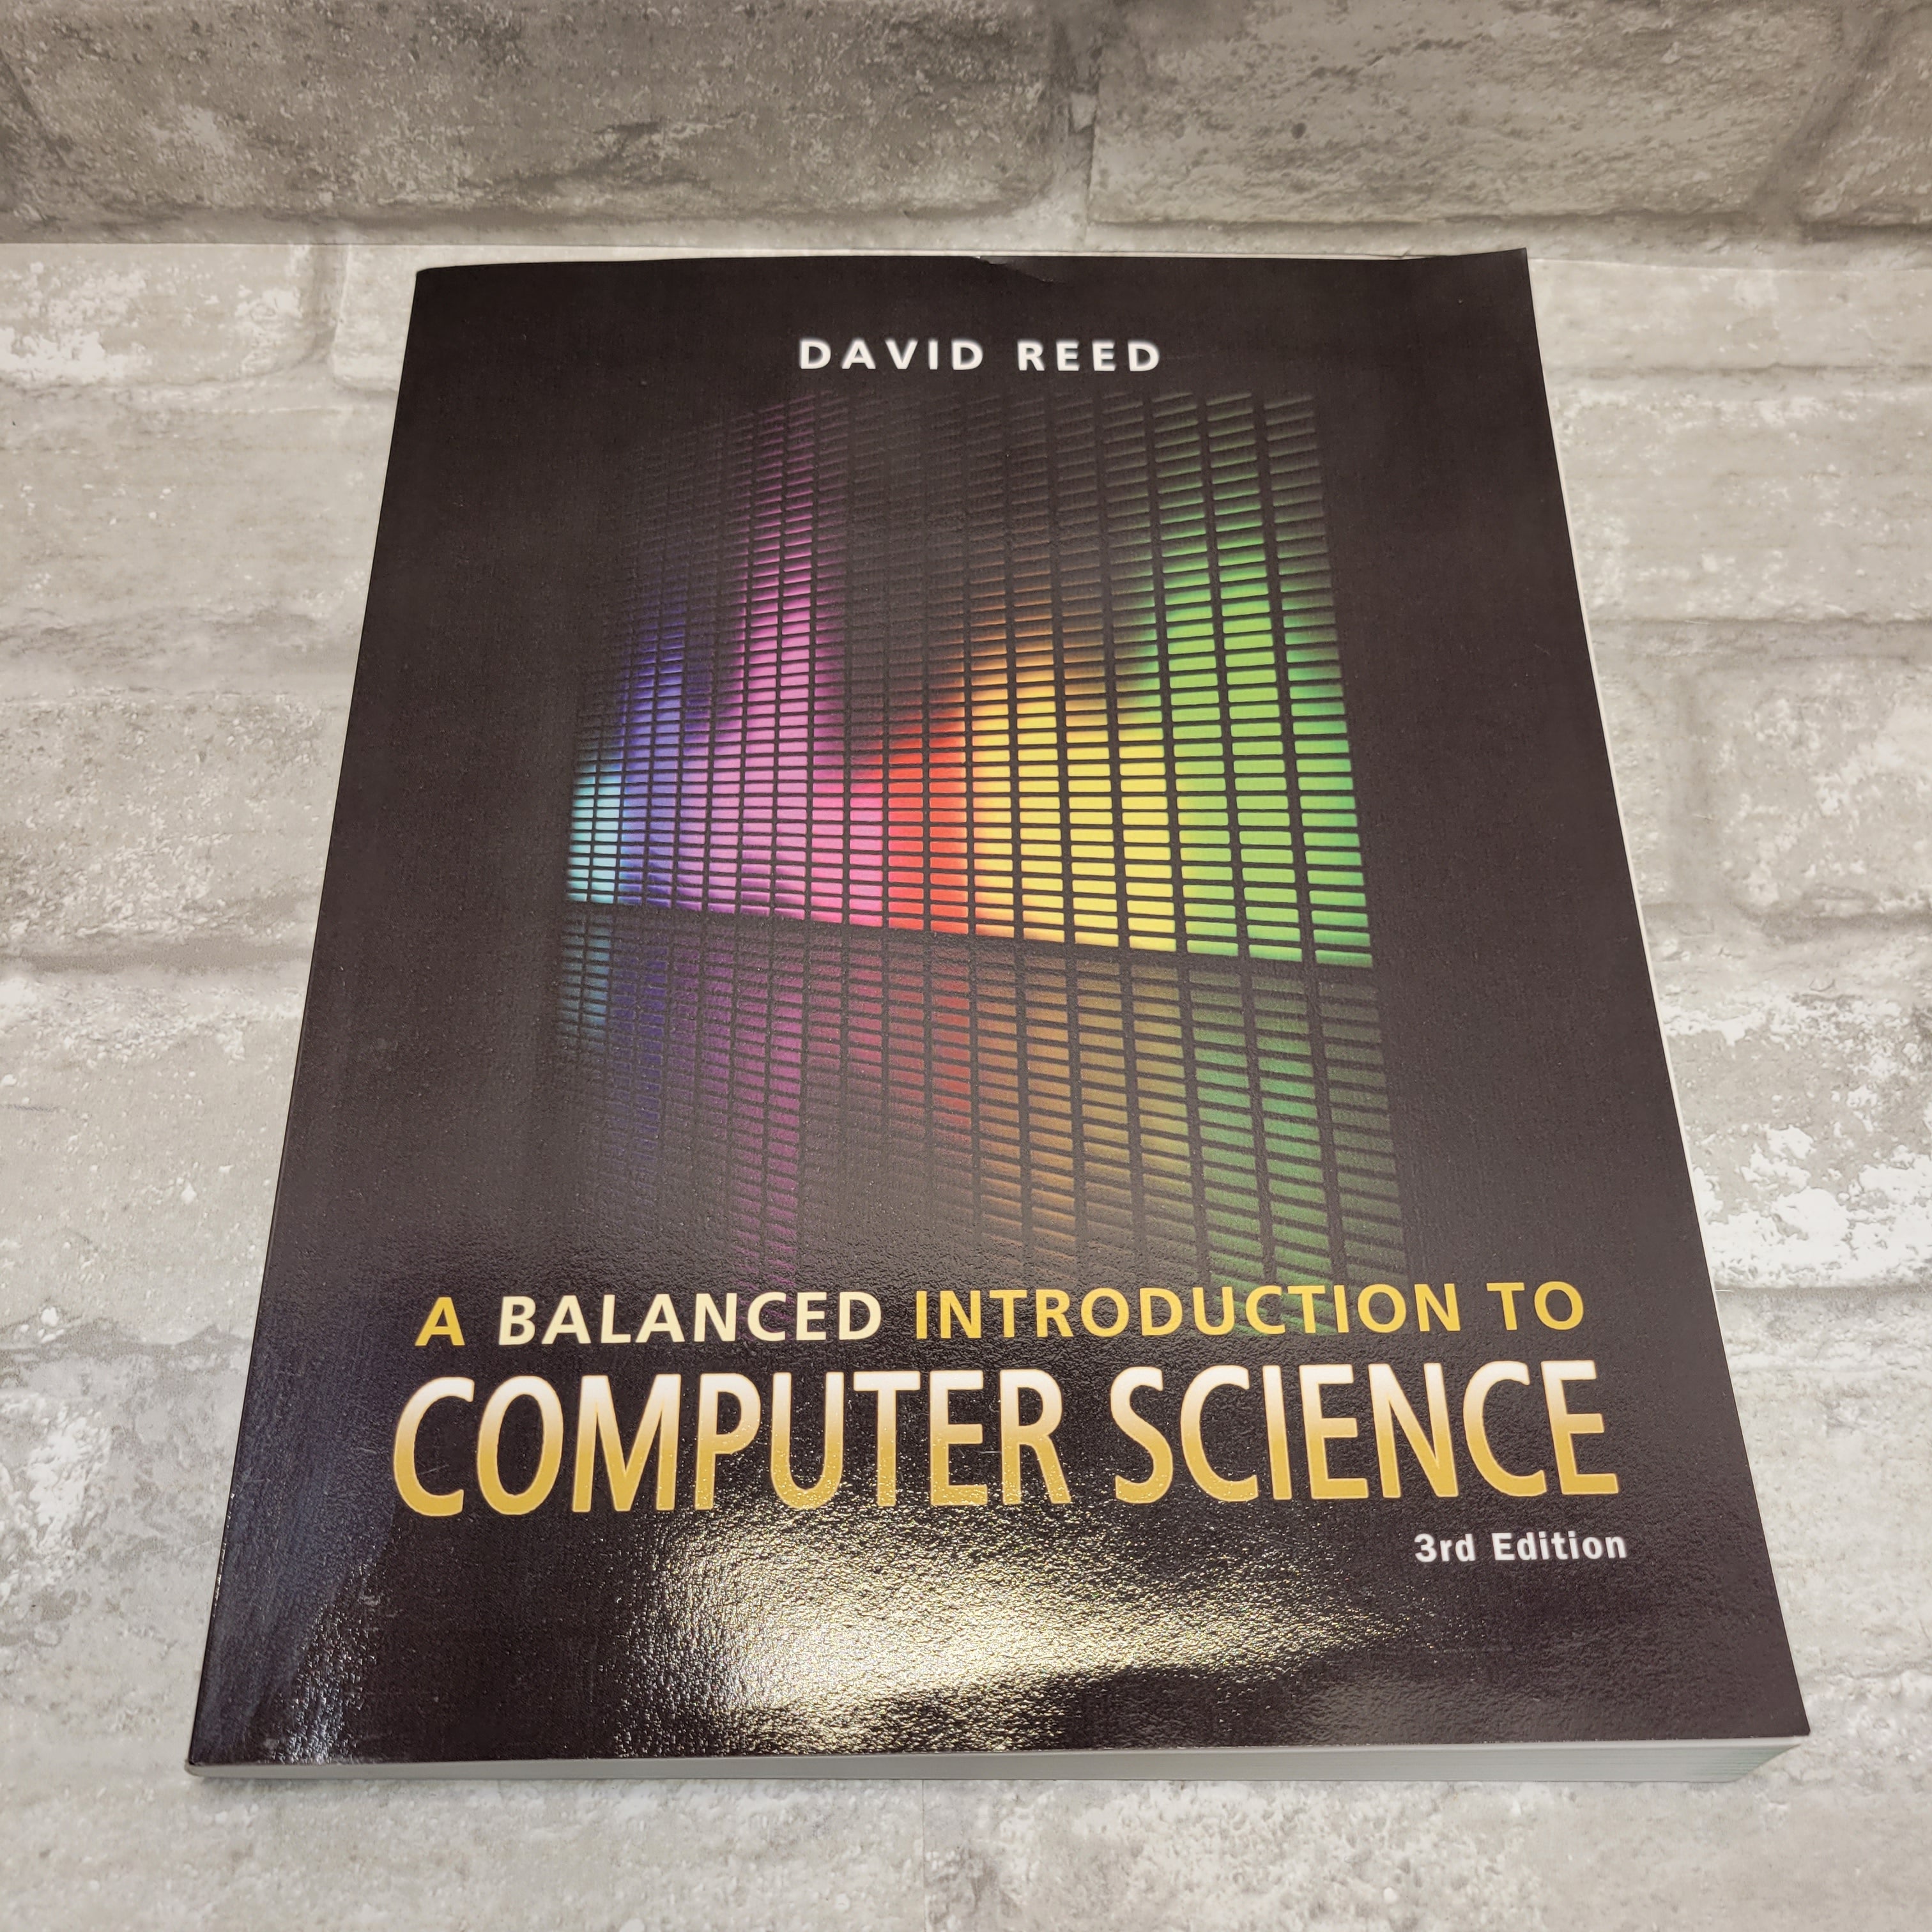 A Balanced Introduction to Computer Science by David Reed 3rd Edition (7977381724398)